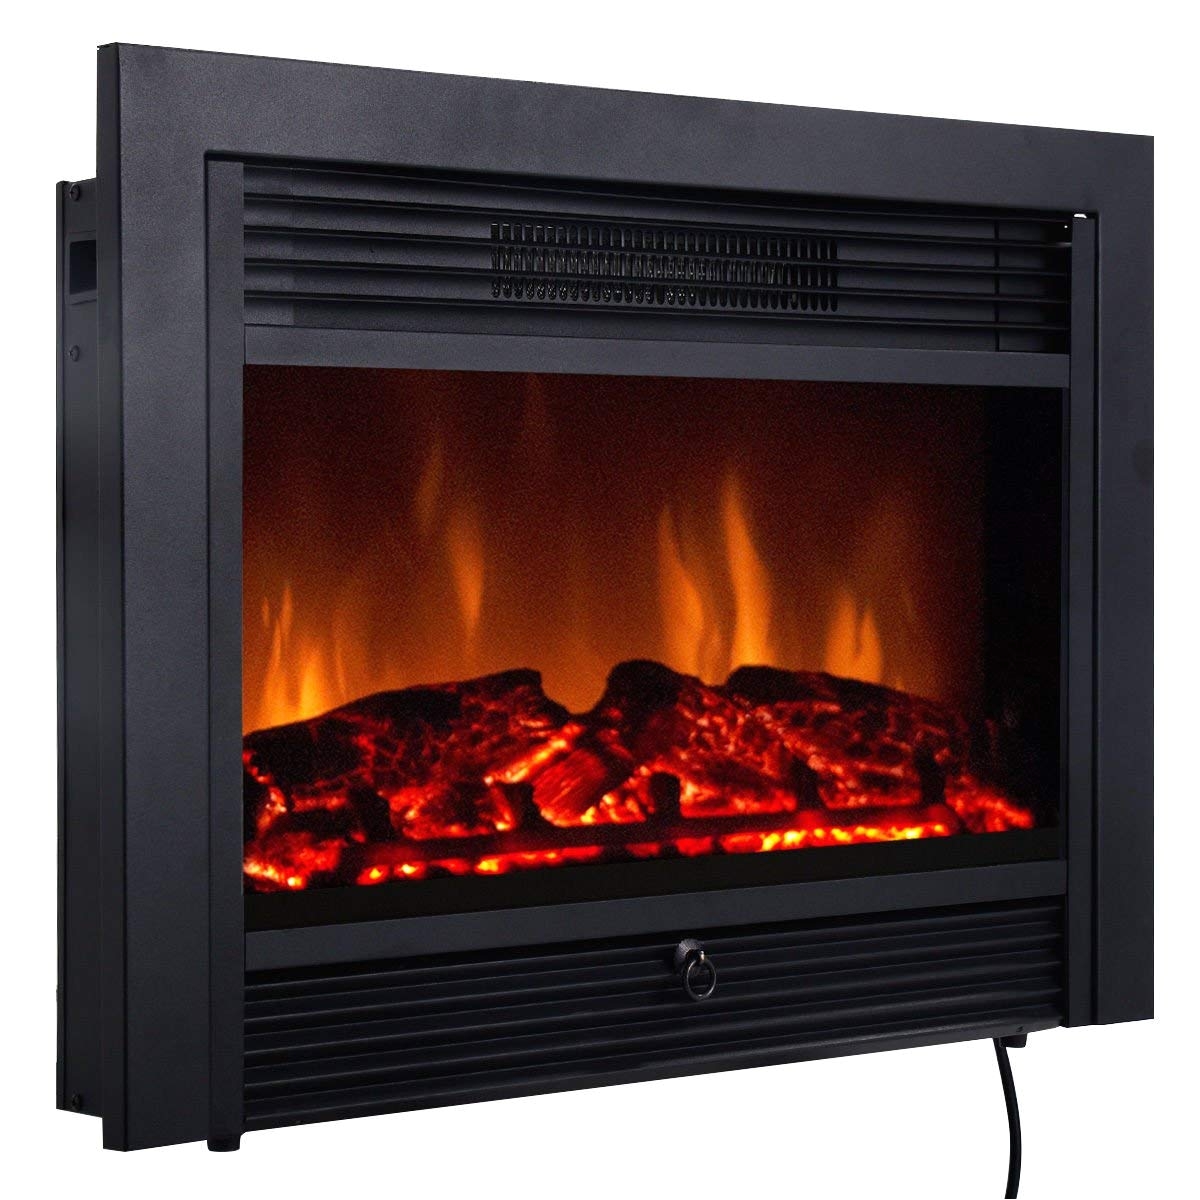 amazon com giantex 28 5 electric fireplace insert with heater glass view log flame with remote control home home kitchen